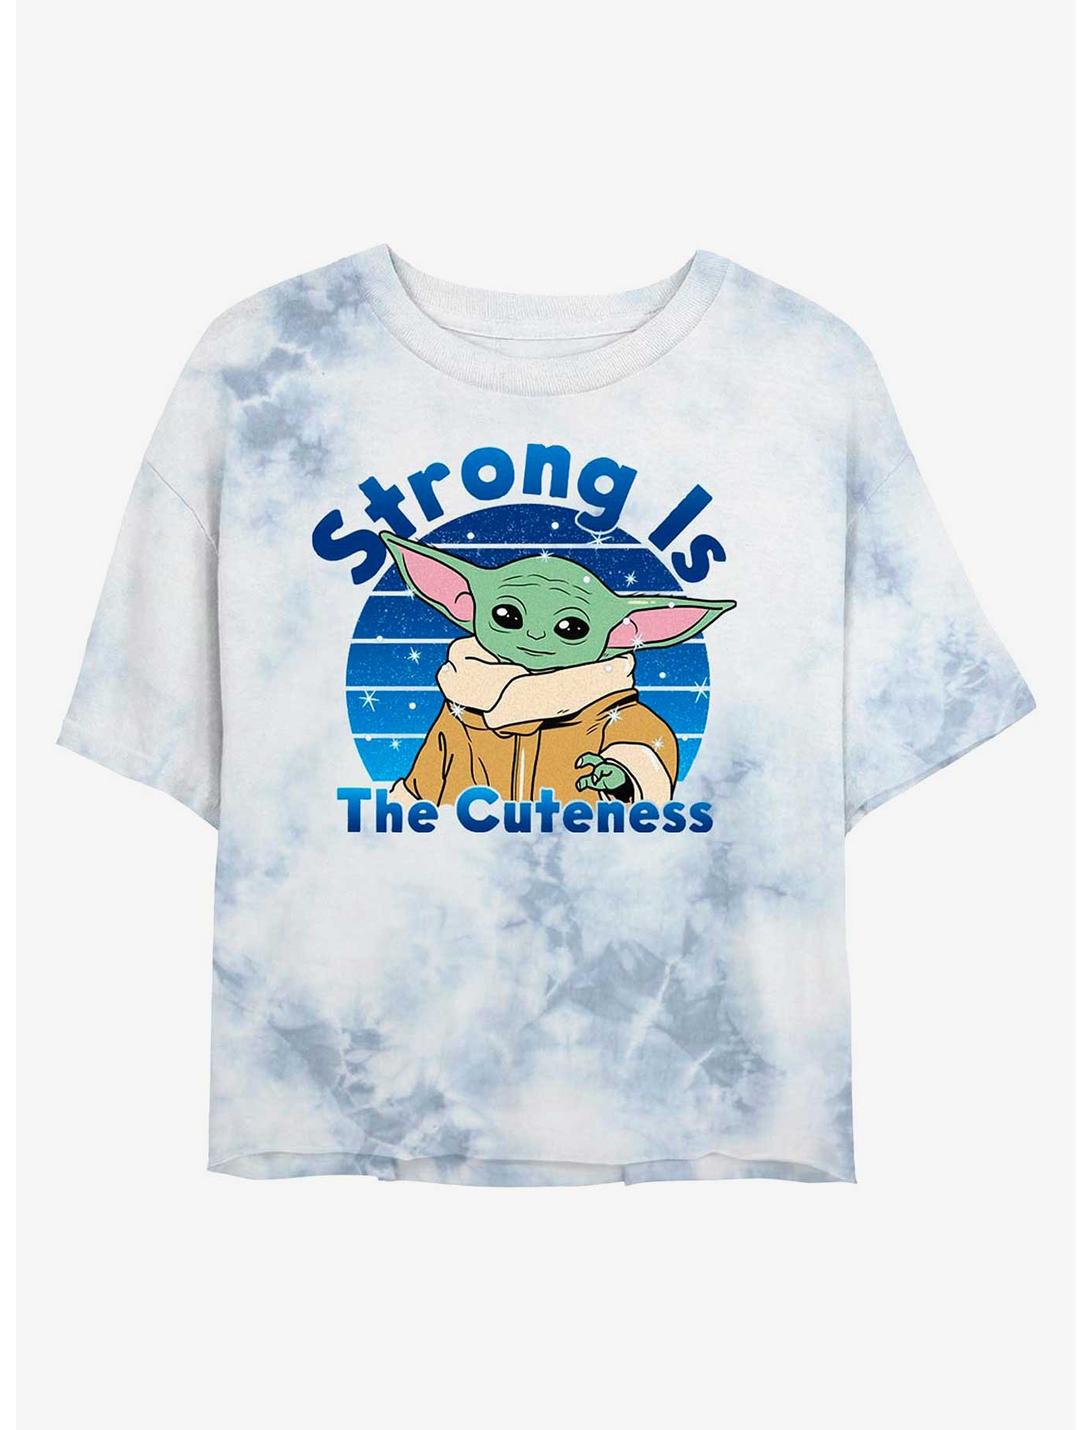 Star Wars The Mandalorian The Child Strong Is The Cuteness Tie-Dye Womens Crop T-Shirt, WHITEBLUE, hi-res